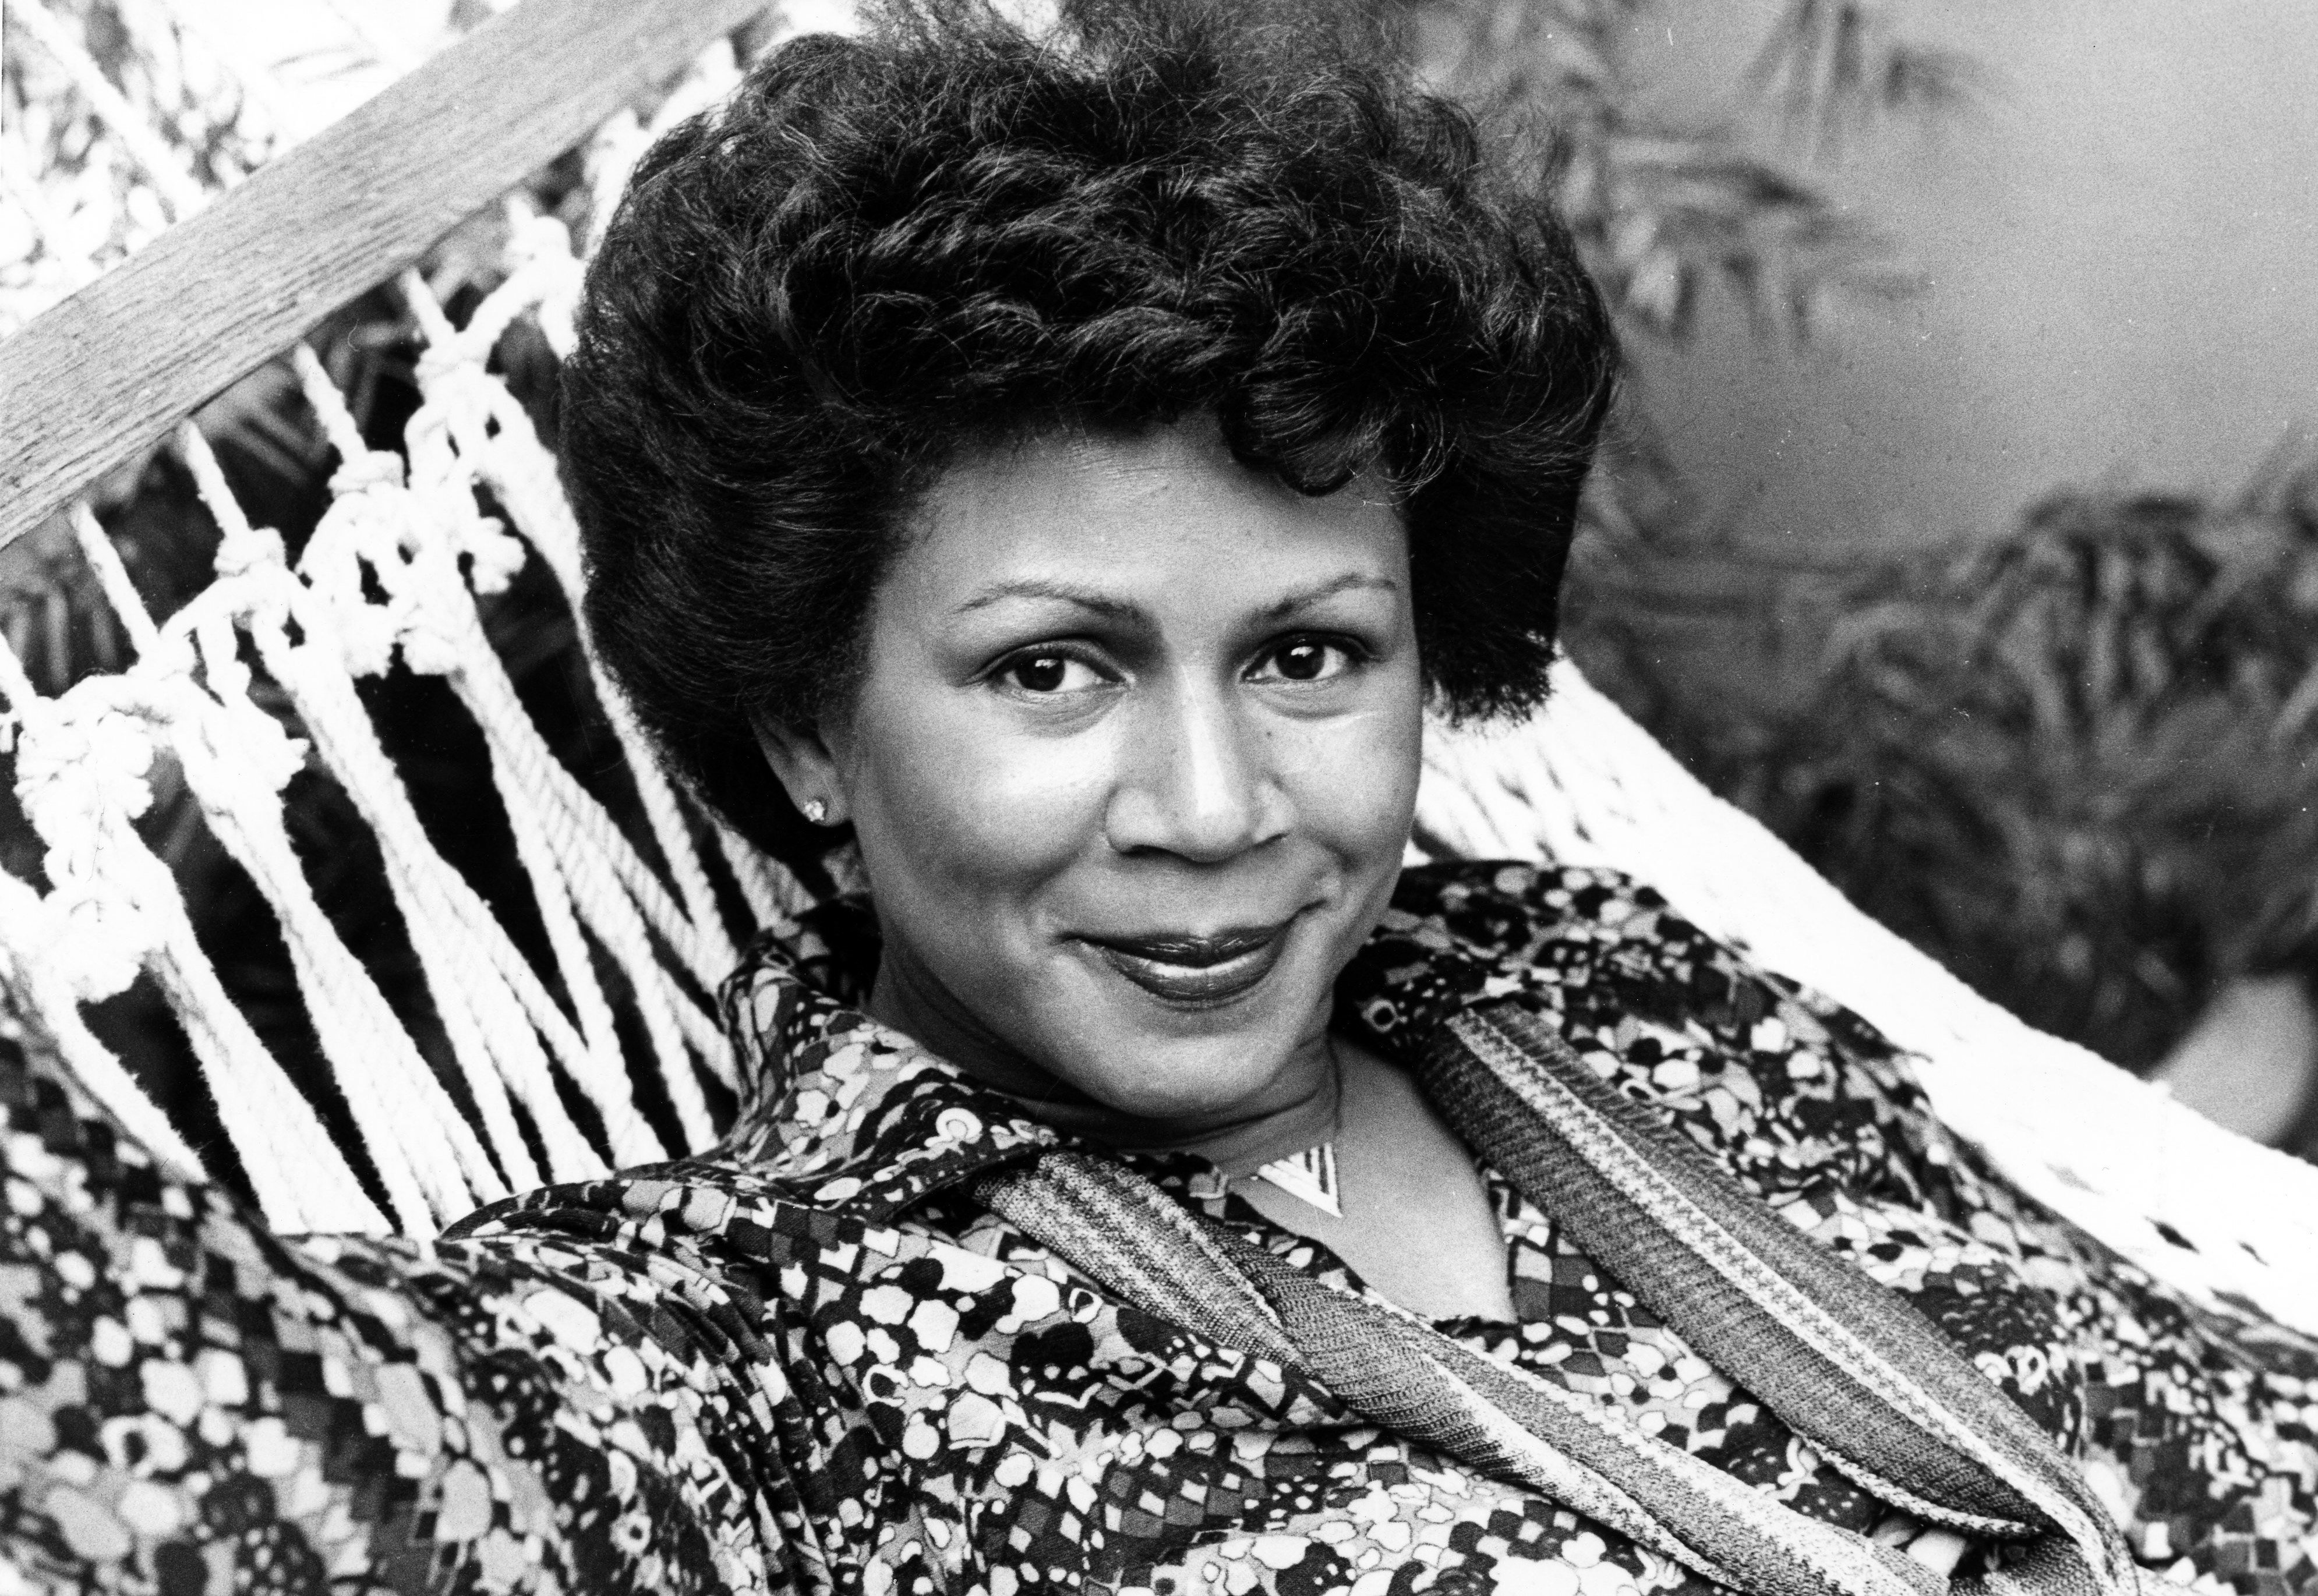 R&B singer Minnie Riperton poses for a portrait on October 20, 1977. | Photo: Getty Images